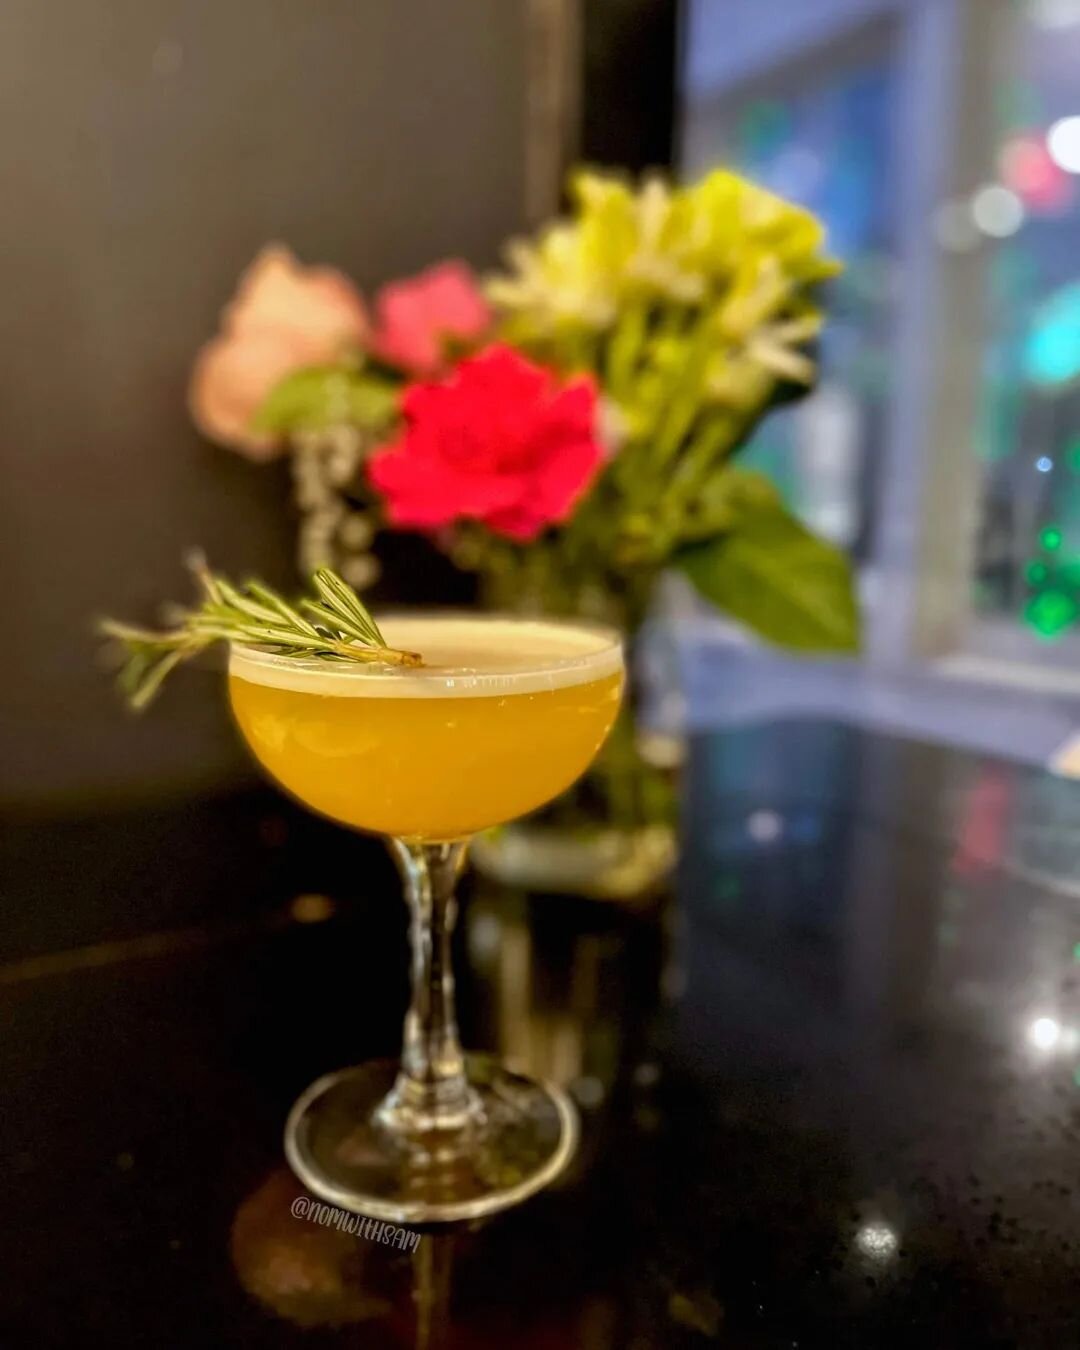 Summers almost here!
Next week we'll be dropping some new items on our menu including this cocktail. Come celebrate after two years and finally enjoying things back to normal!
.
.
.
CLEMENTINE VON MATTERHORN
Tenmei brown sake, Ungava, smoked rosemary